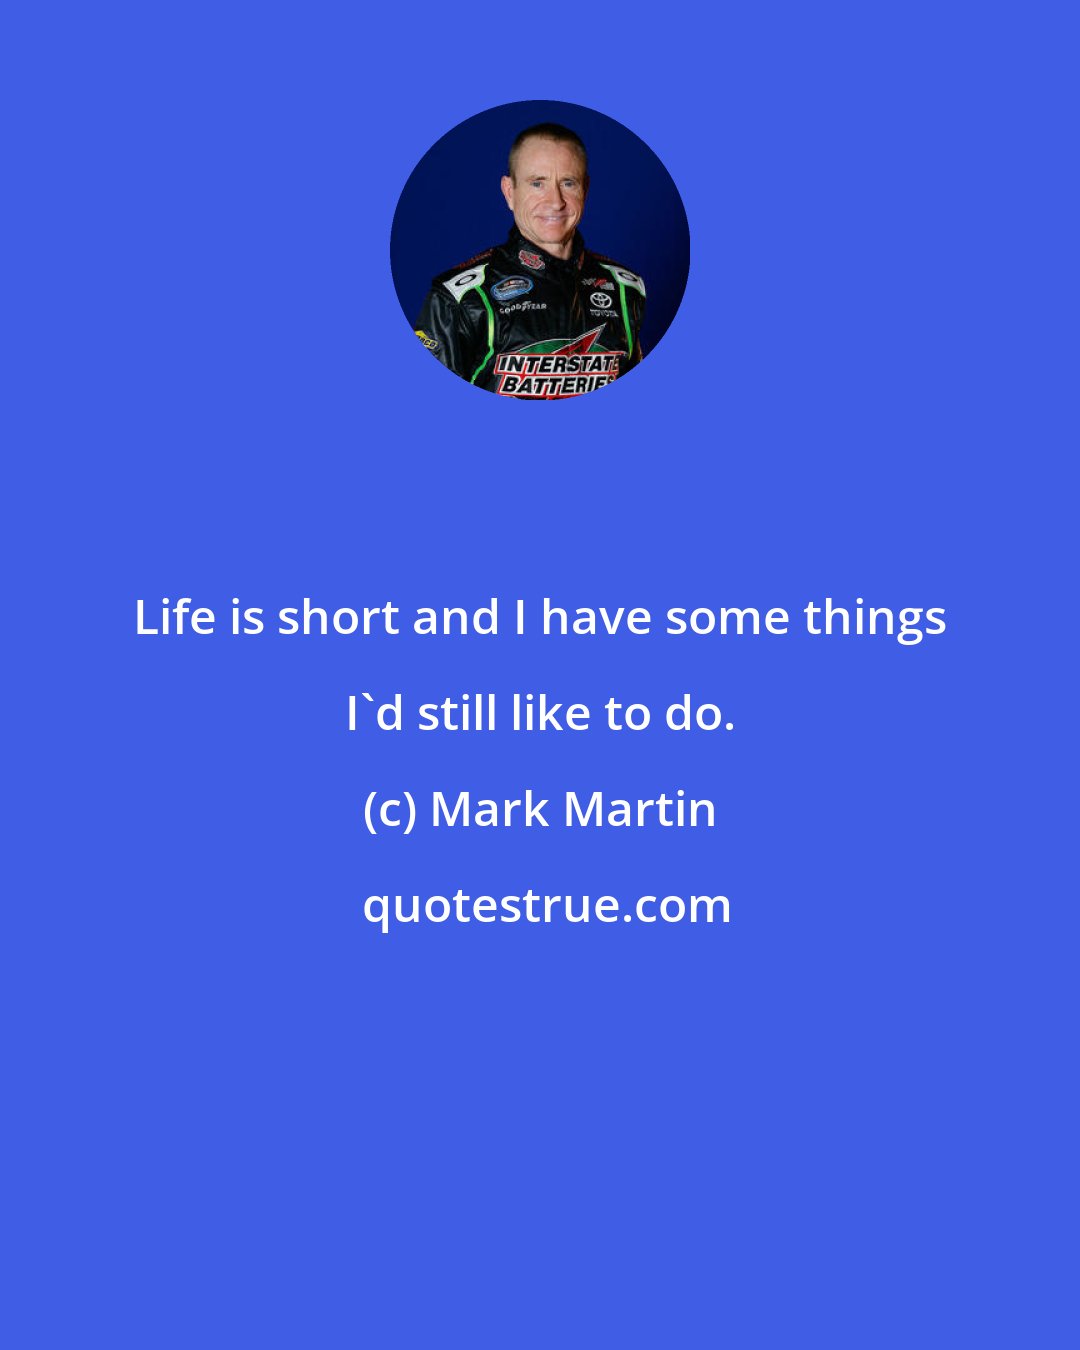 Mark Martin: Life is short and I have some things I'd still like to do.